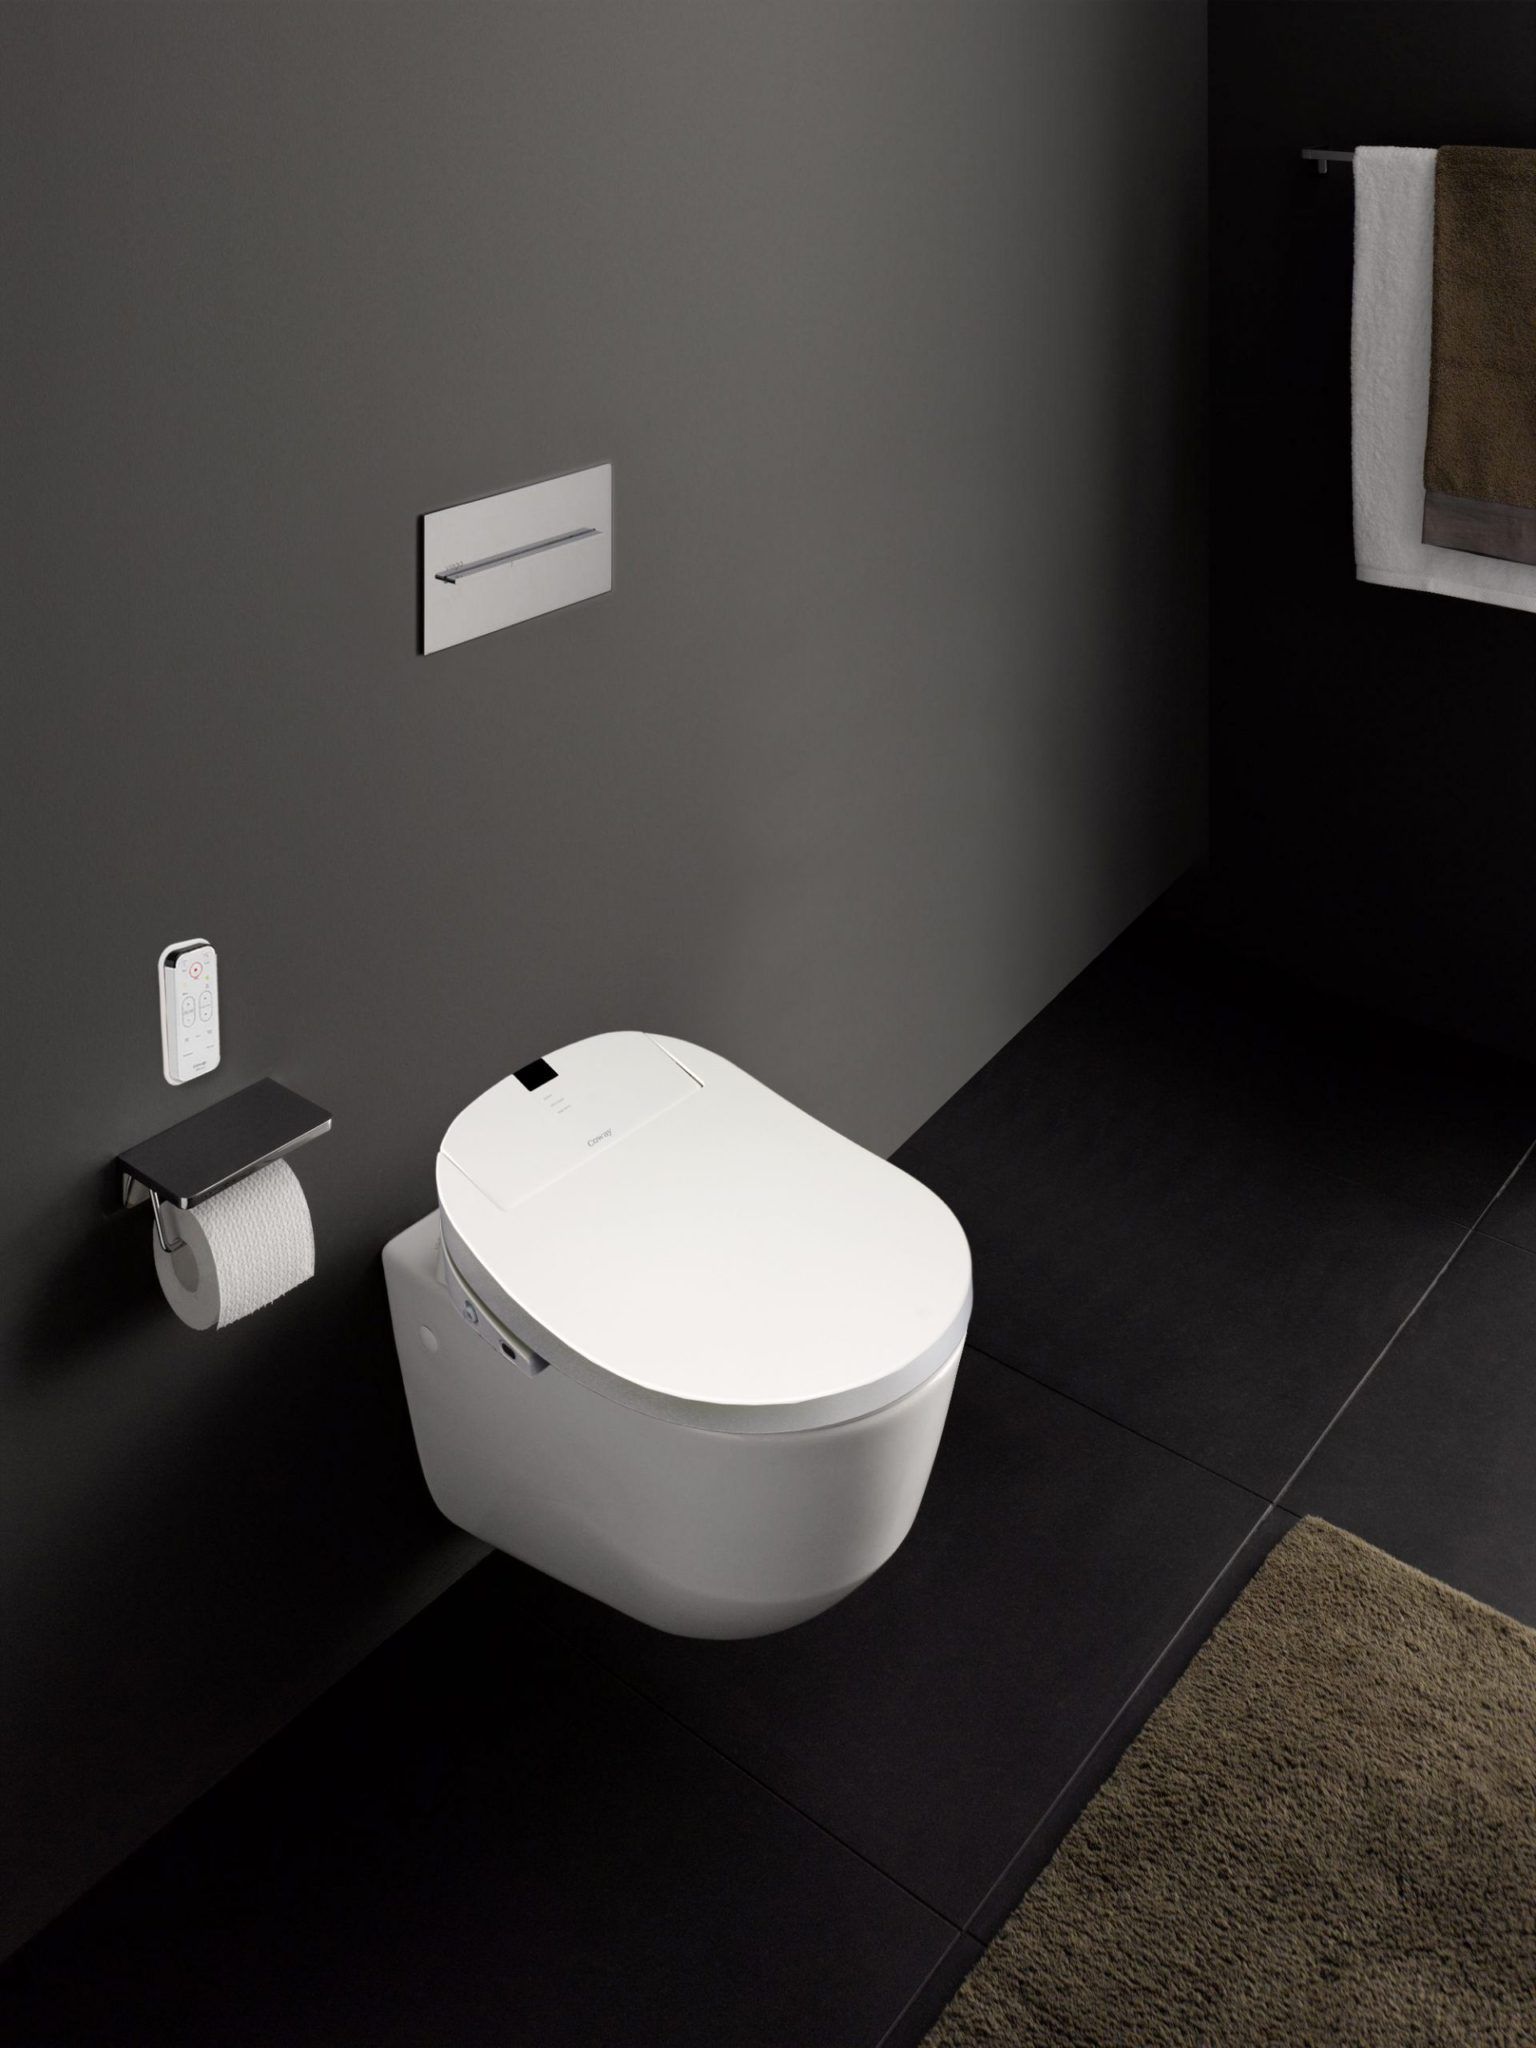 Minimalist and monochrome bathroom with white floating toilet and toilet paper. Black painted walls and black tiles. Brown bath mat and towels.